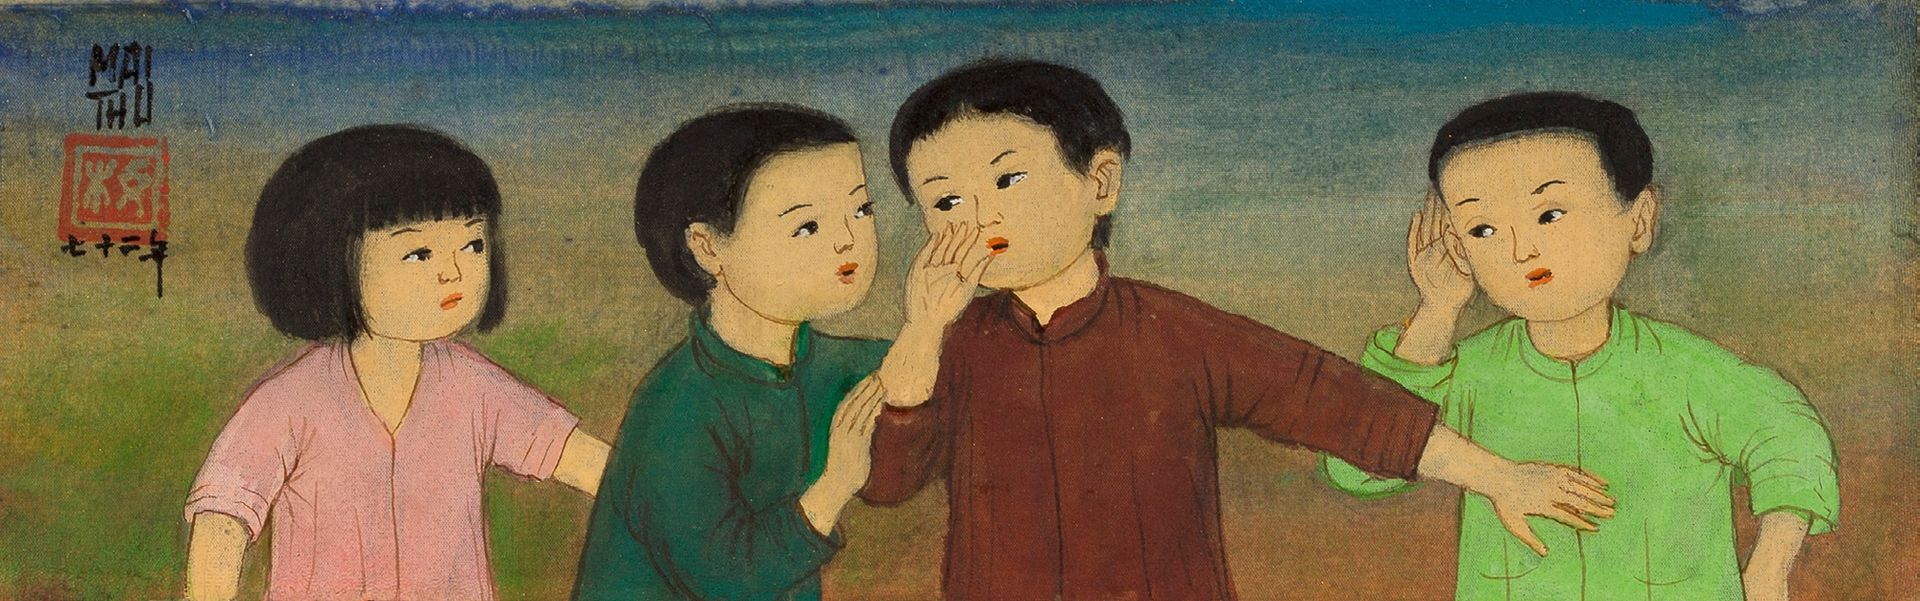 MAI trung THU (1906-1980) 
Jeunes enfants chuchotant, 1972

Ink and color on sil&hellip;